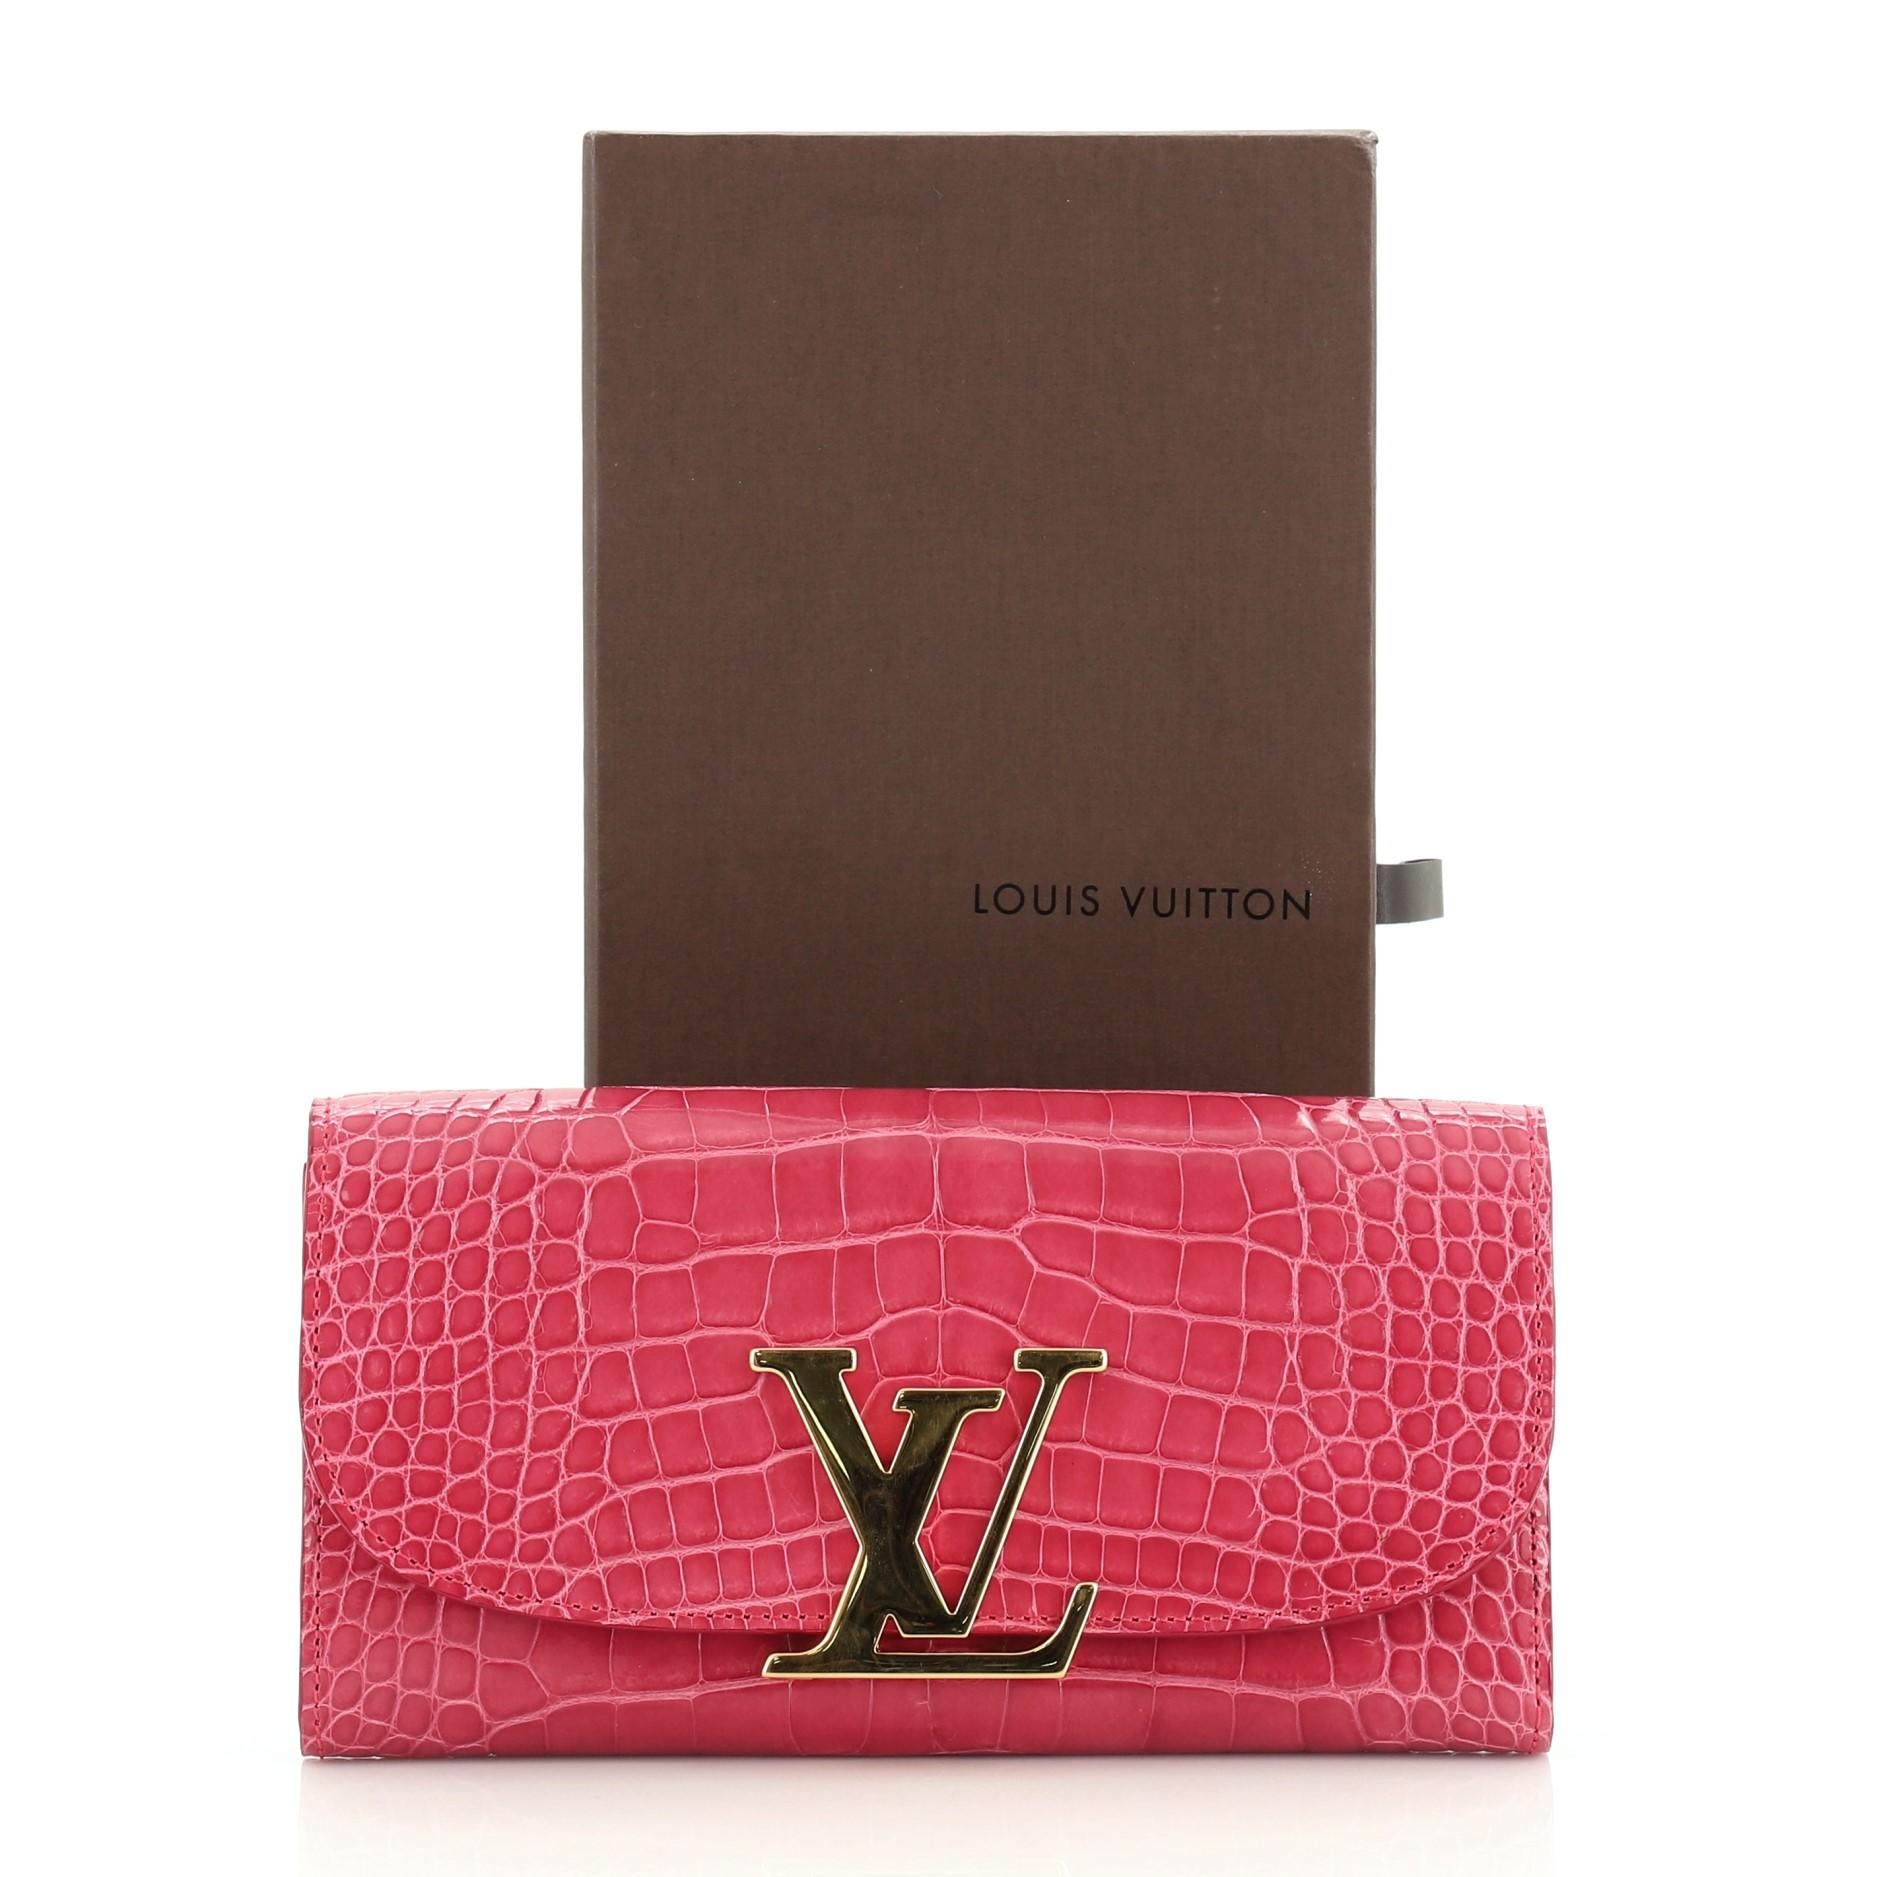 This Louis Vuitton Vivienne LV Wallet Alligator Long, crafted from genuine pink alligator, features an oversized LV logo snap closure and gold-tone hardware. Its flap opens to a pink leather interior with multiple card slots, slip pocket and zip